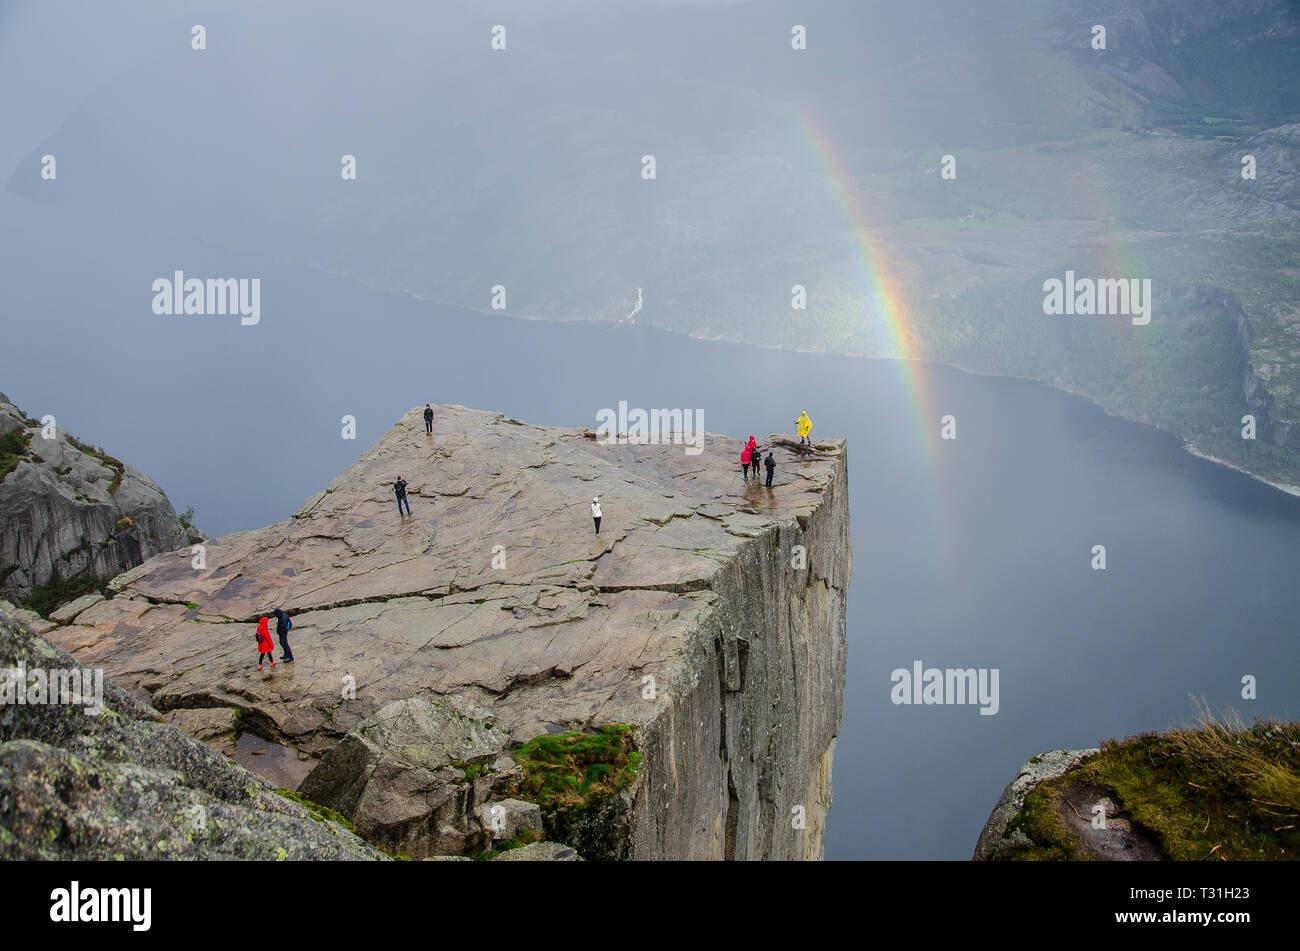 Preikestolen Pulpit Rock with double rainbow in the background a Lysefjord underneath. Stock Photo